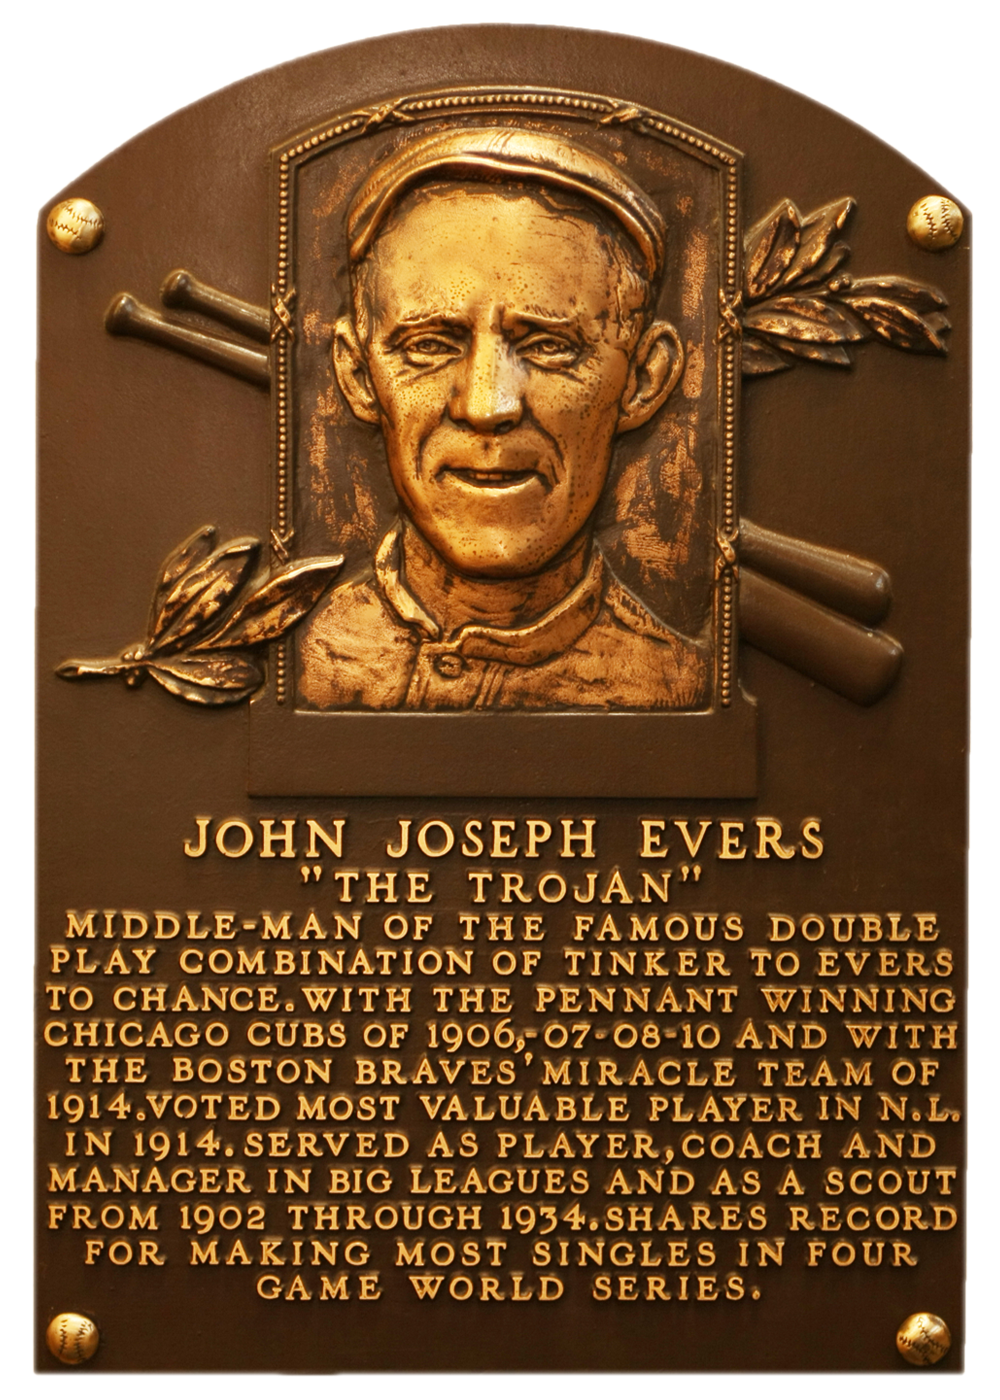 Johnny Evers Hall of Fame plaque